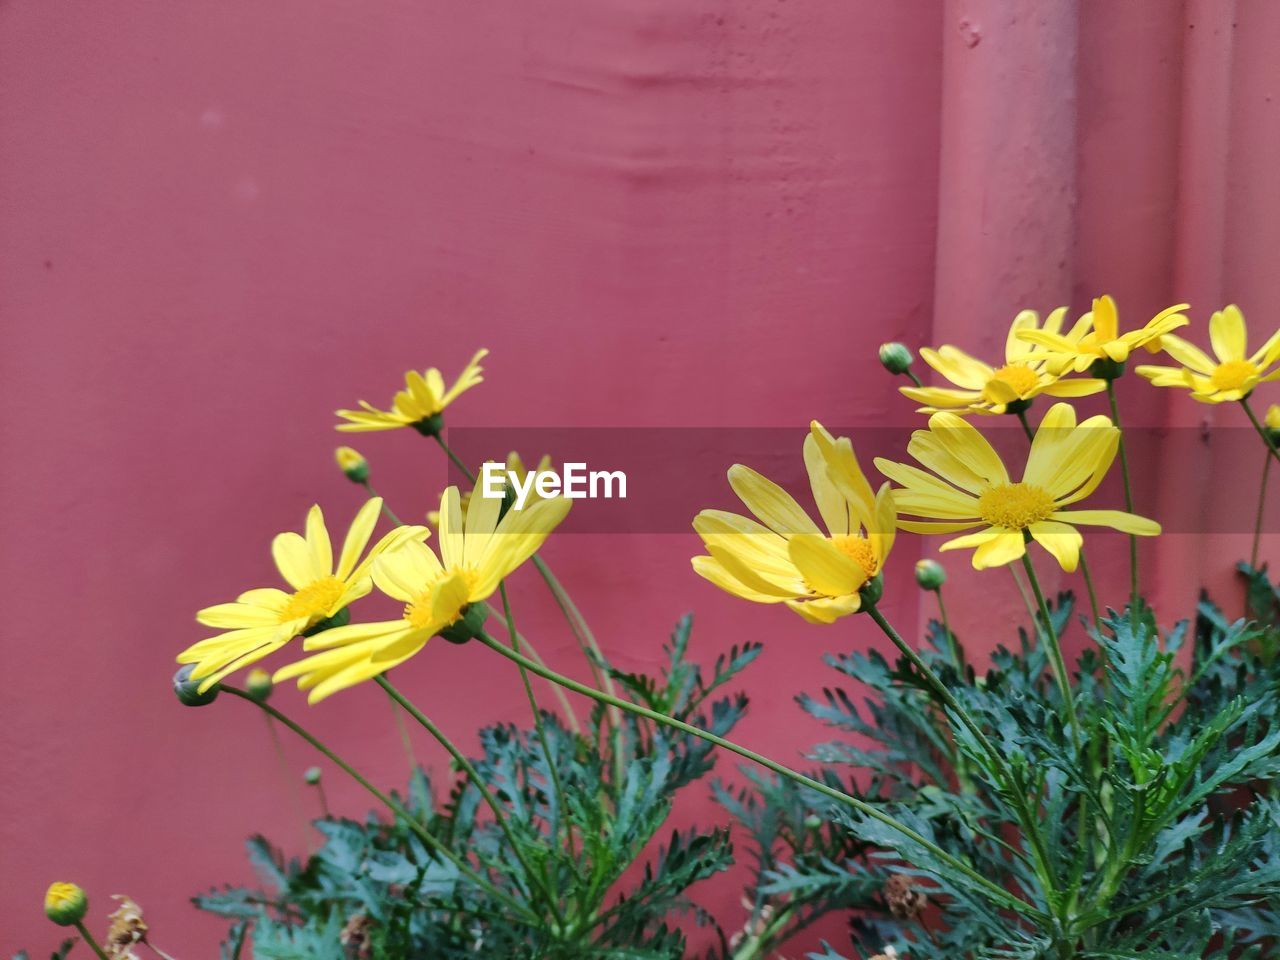 CLOSE-UP OF YELLOW DAISY PLANT AGAINST WALL